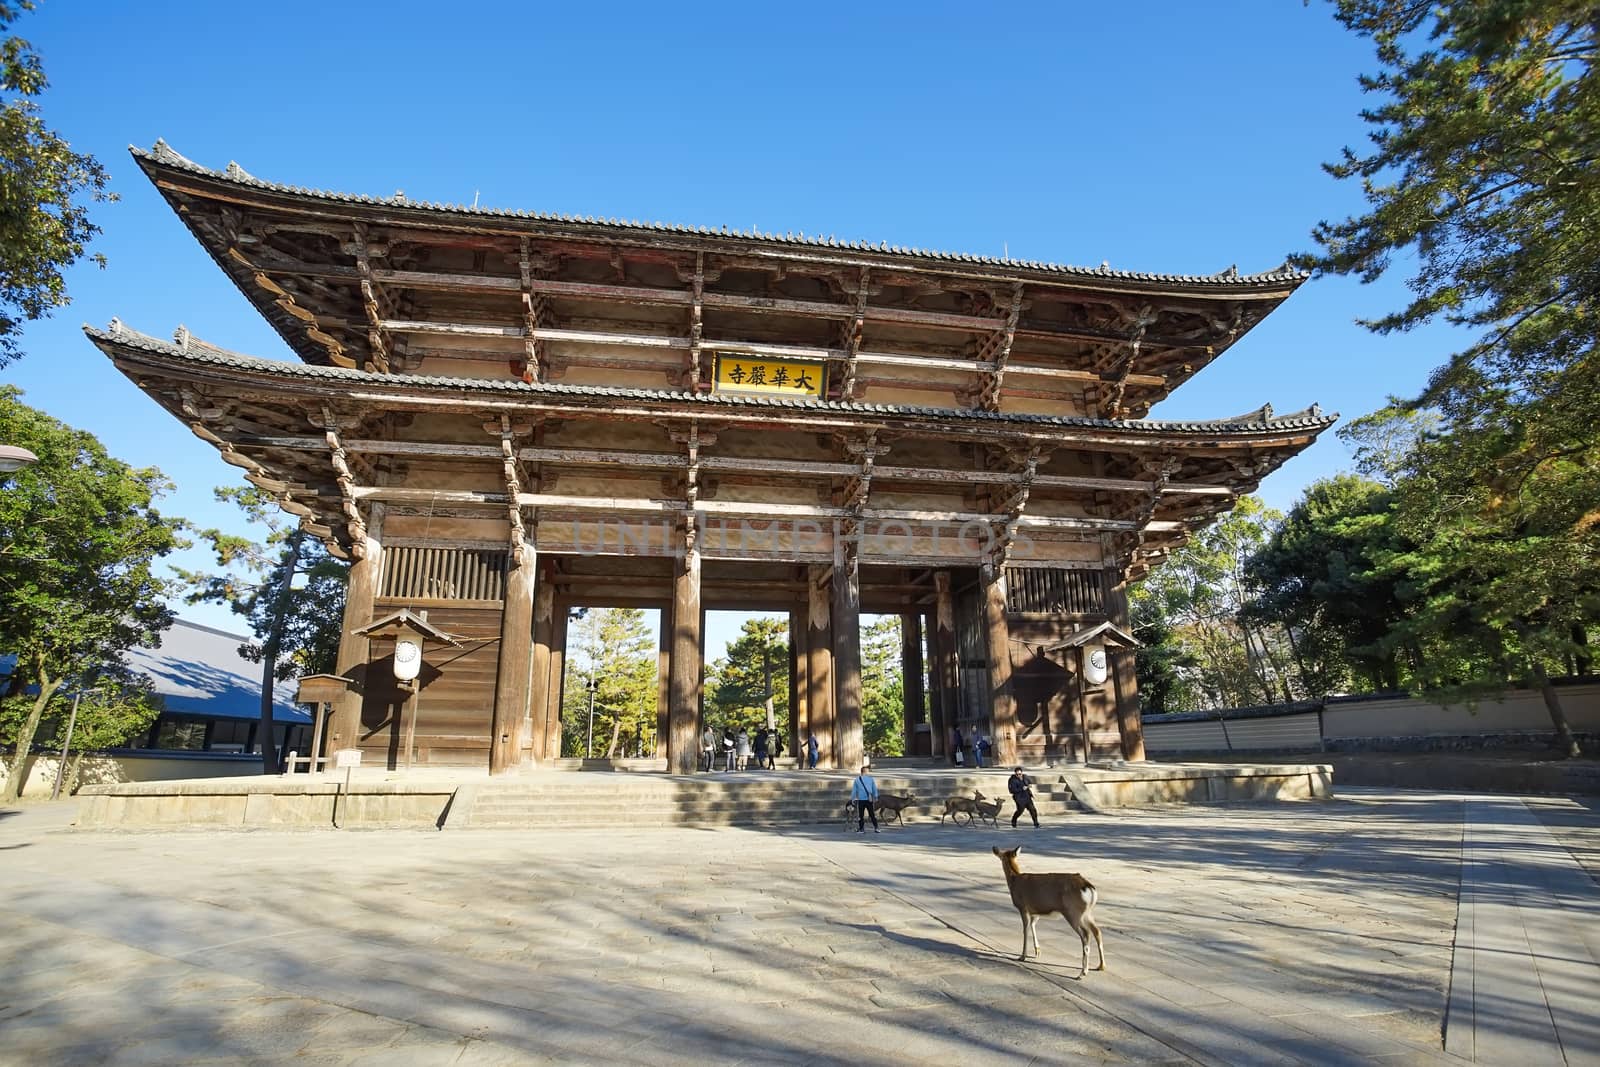 Nara, Japan - December 16, 2019 : The great Wooden gate Of Todaiji Temple, this is the most famous travel destinations of Nara city in Kansai area of Japan and this place has a lot of deers in the park.